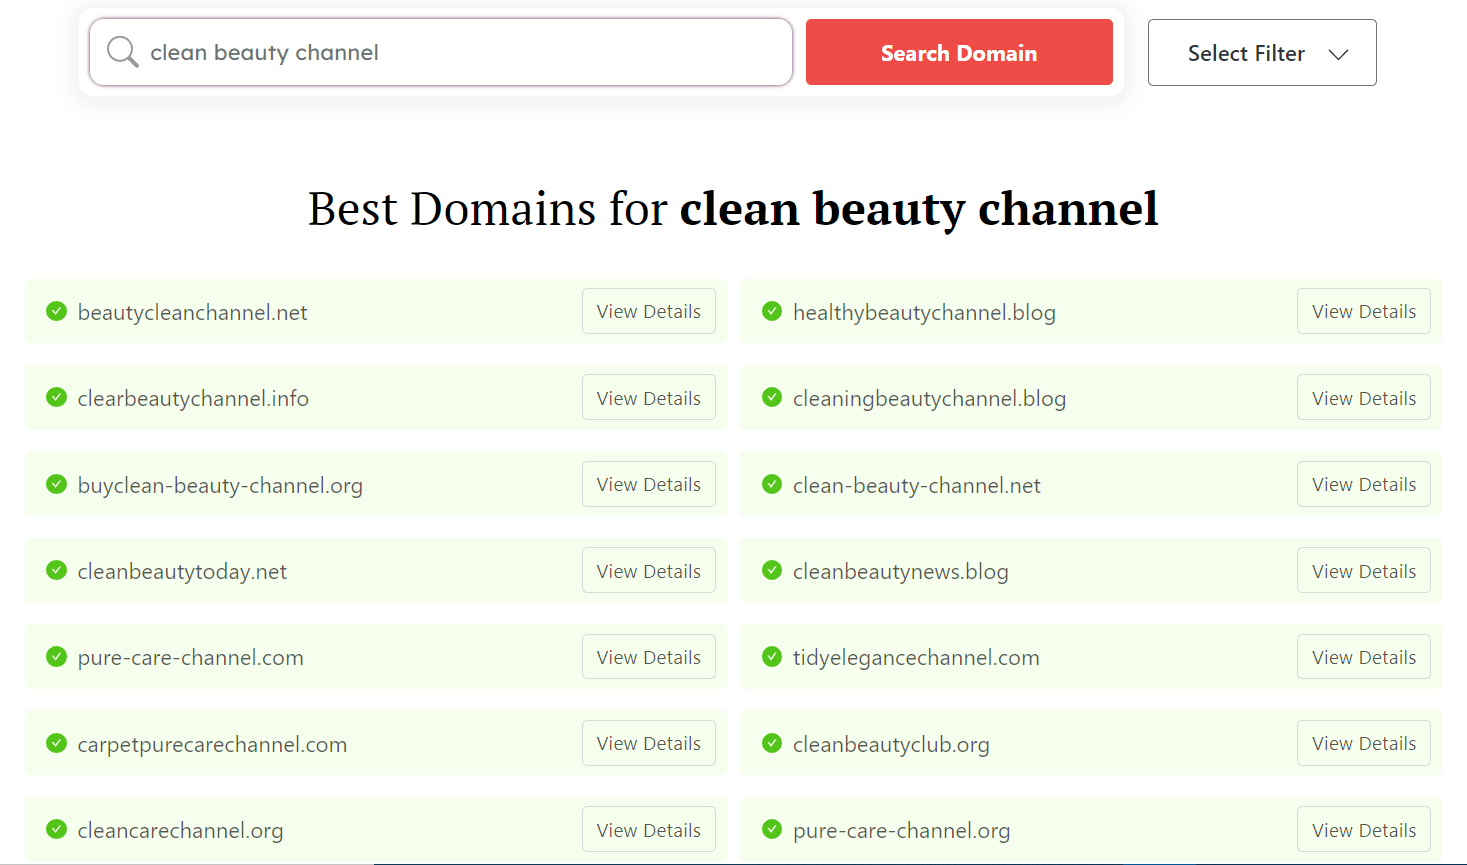 YouTube name generator - search results for "clean beauty channel"